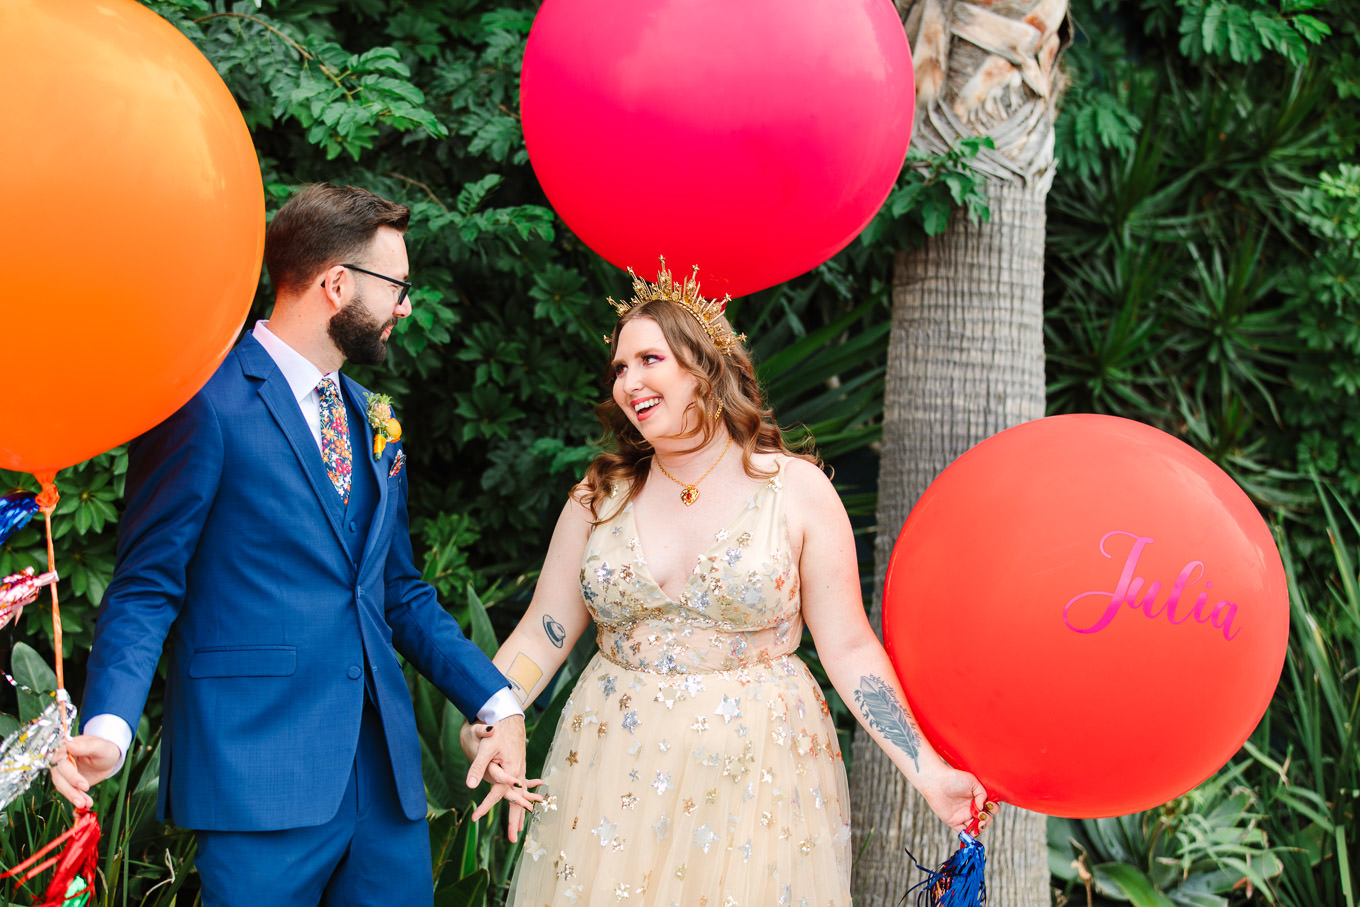 Bride and groom with colorful giant balloons First look between bride and groom | Colorful Downtown Los Angeles Valentine Wedding | Los Angeles wedding photographer | #losangeleswedding #colorfulwedding #DTLA #valentinedtla   Source: Mary Costa Photography | Los Angeles